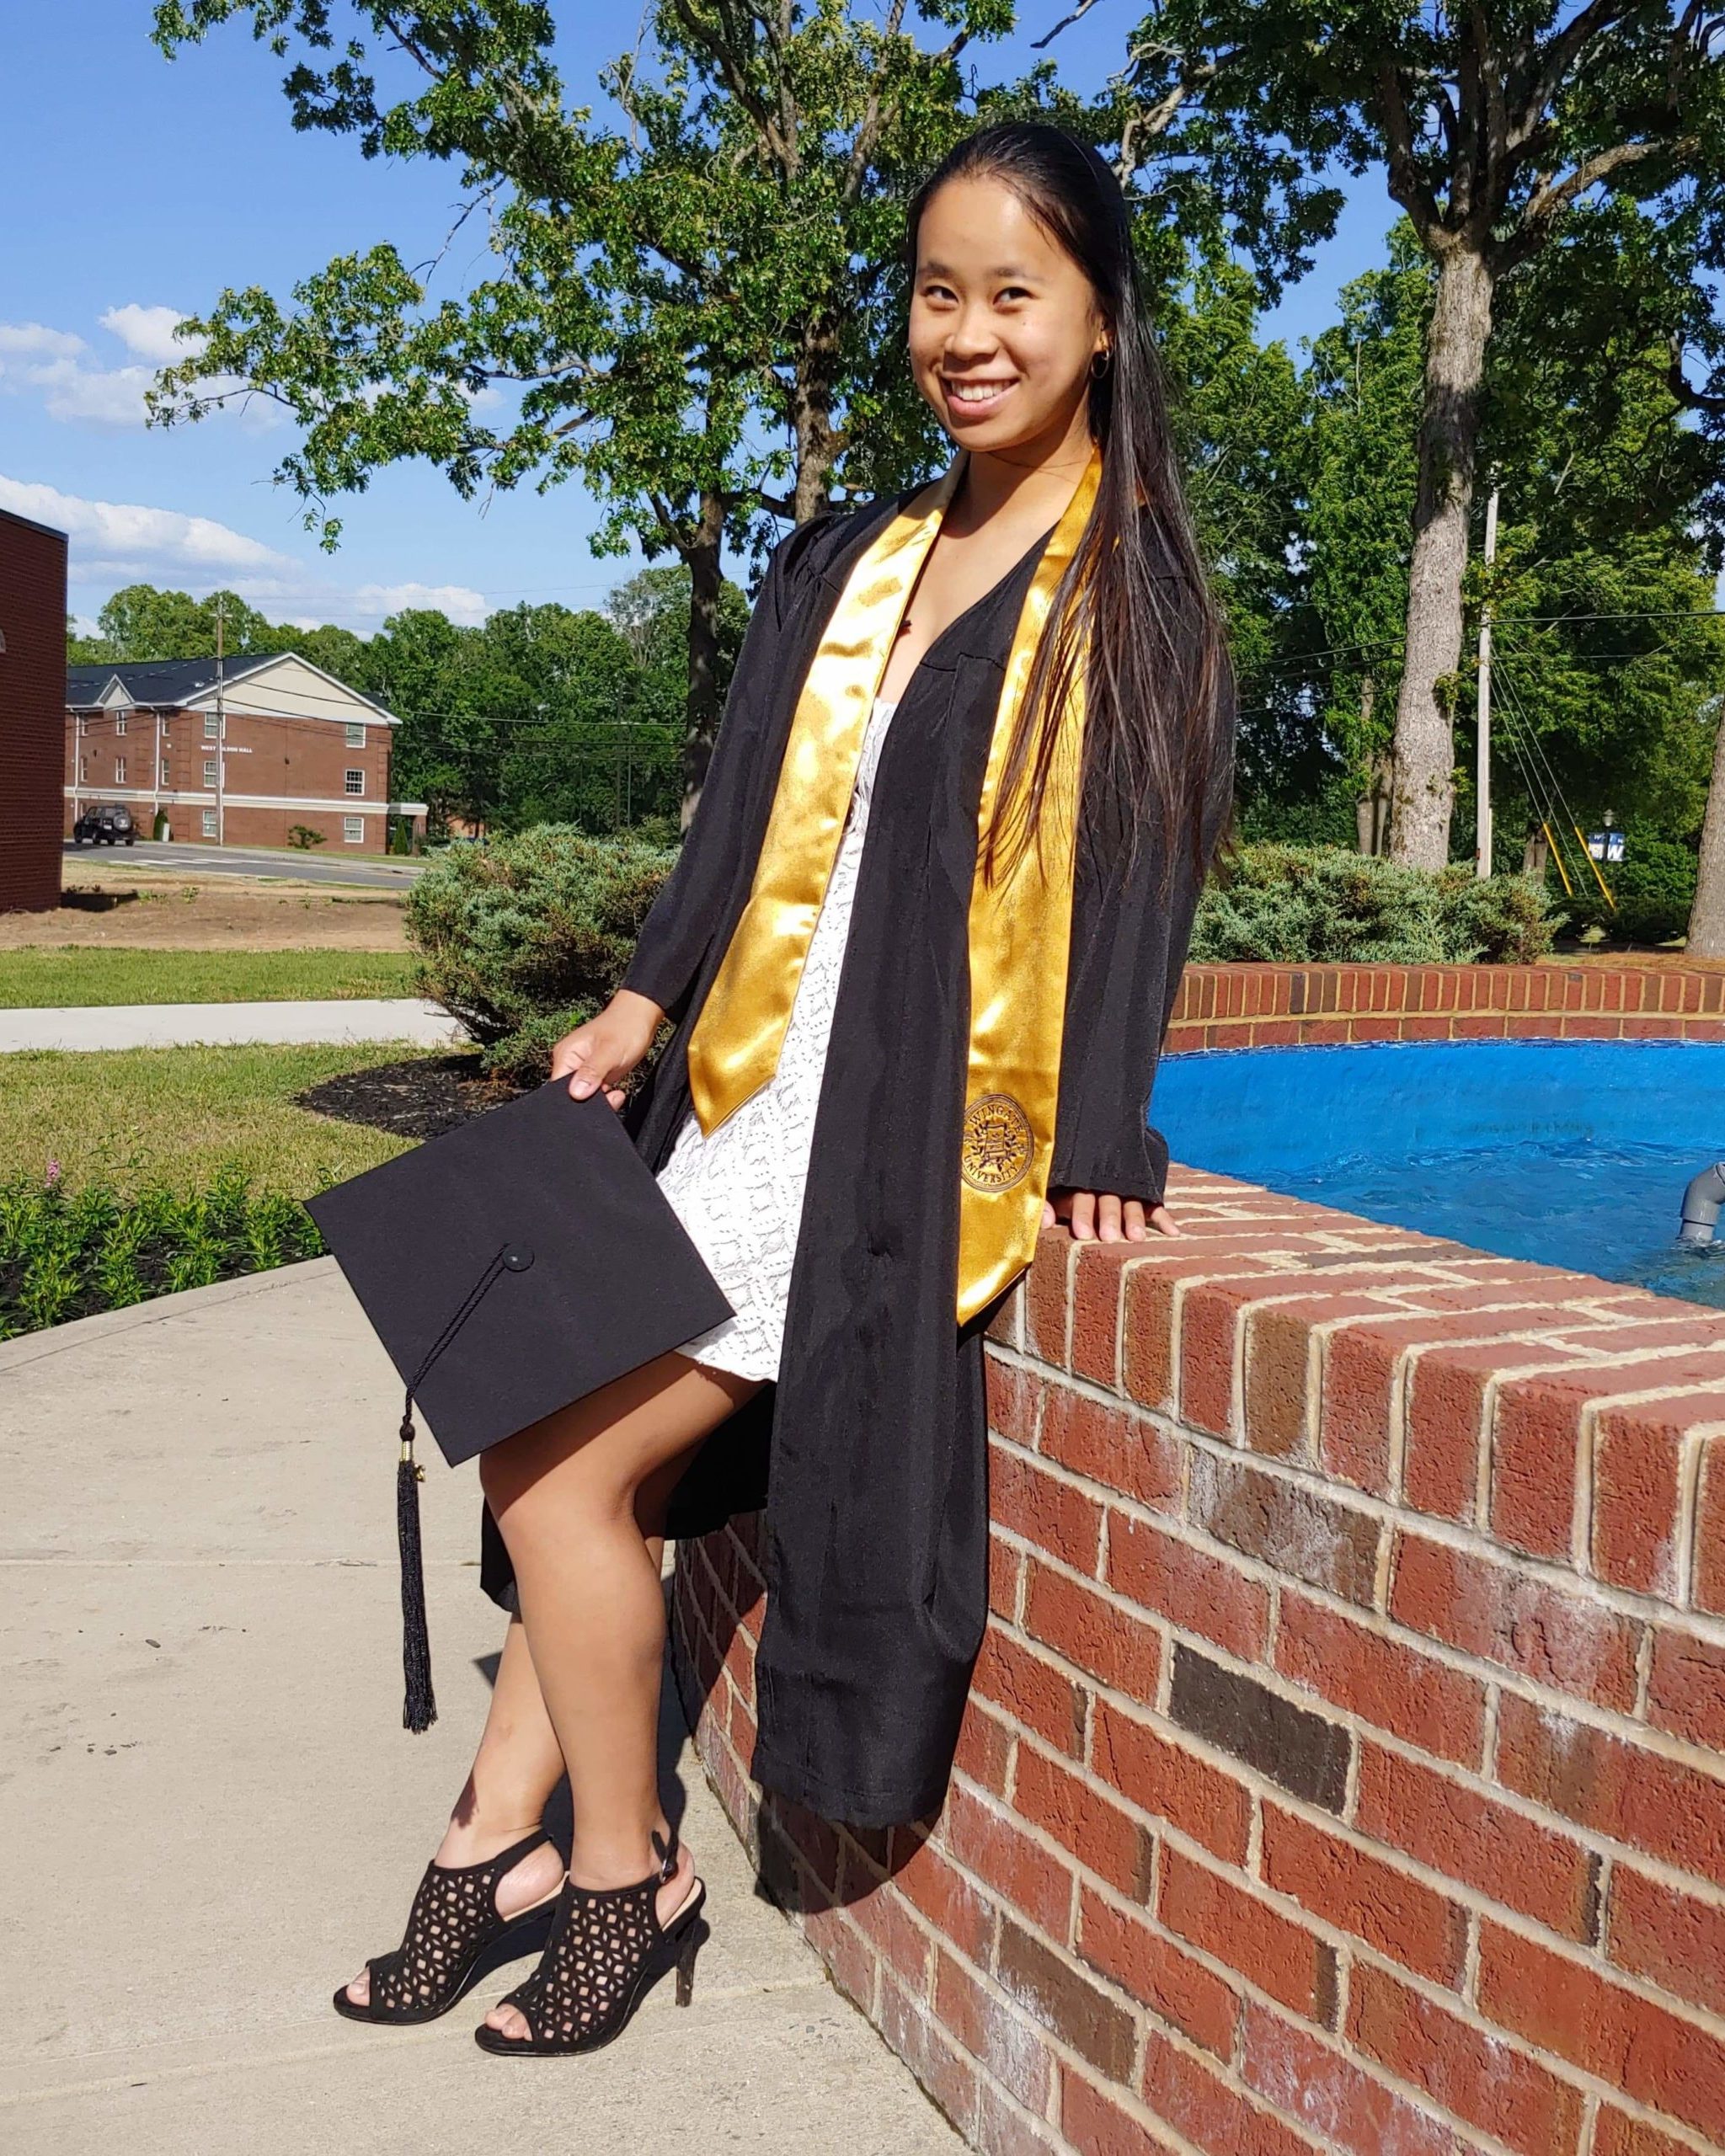 smiling girl sitting on the edge of a brick fountain wearing black graduation cap and gown and yellow sash